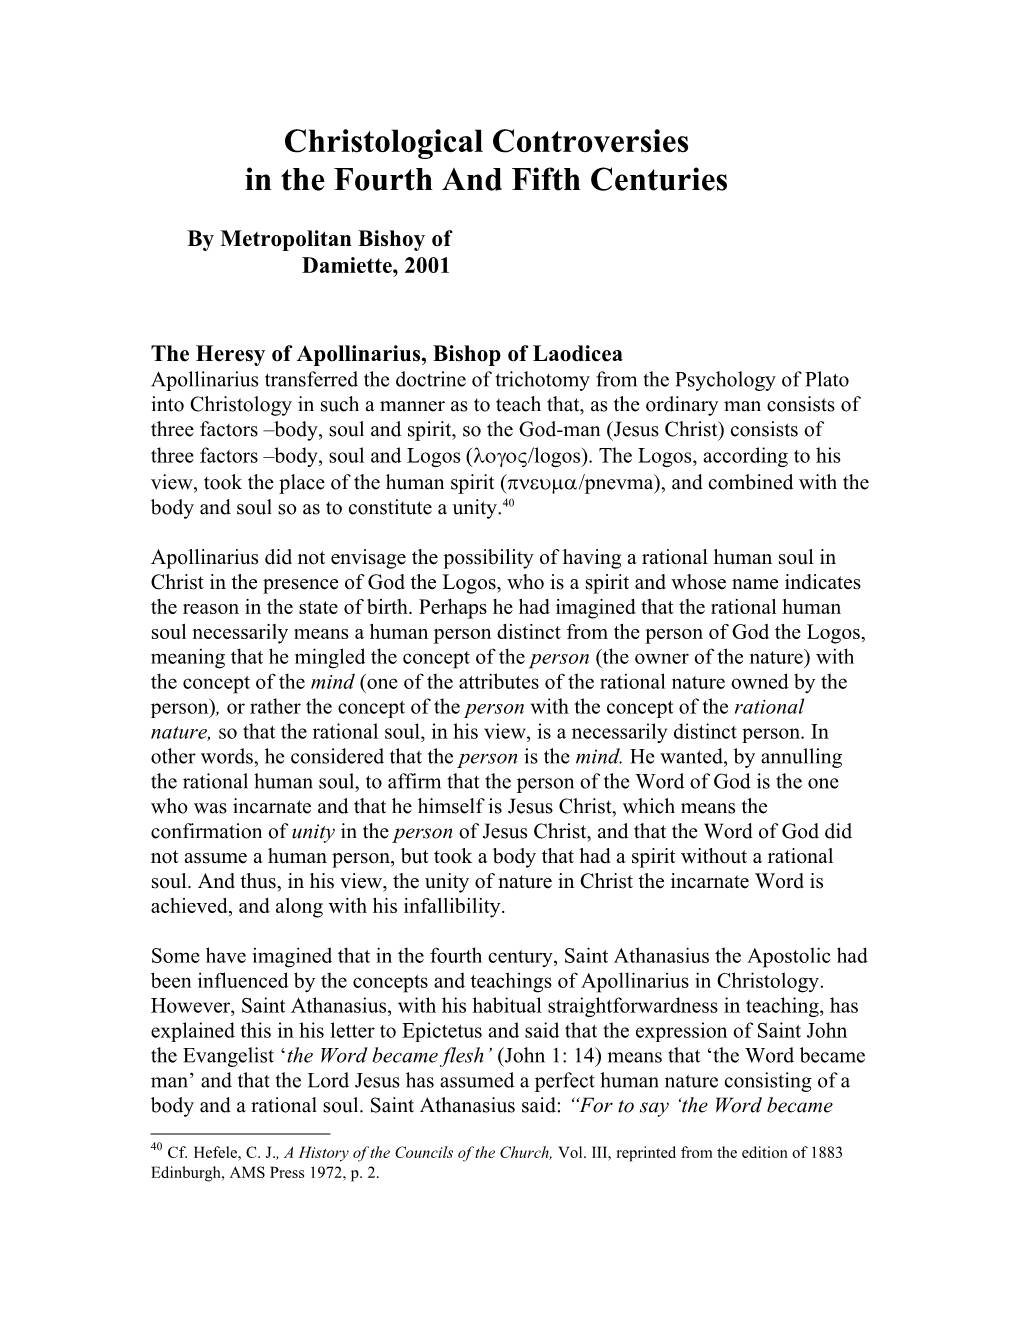 In the Fourth and Fifth Centuries